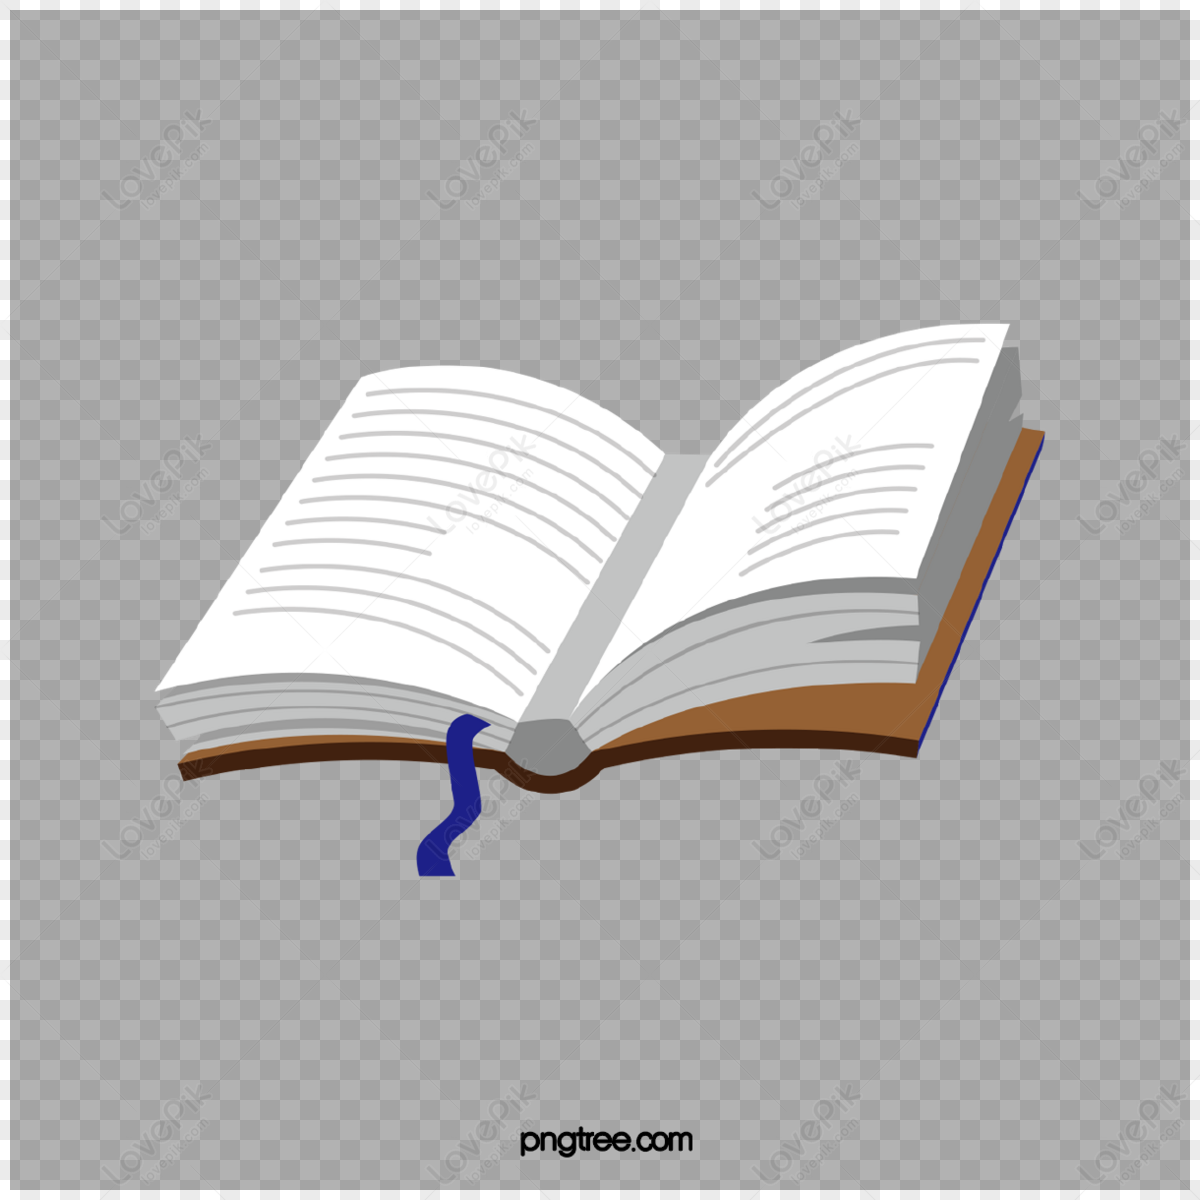 An open book cartoon stationery,office supplies,color stationery,student supplies png image